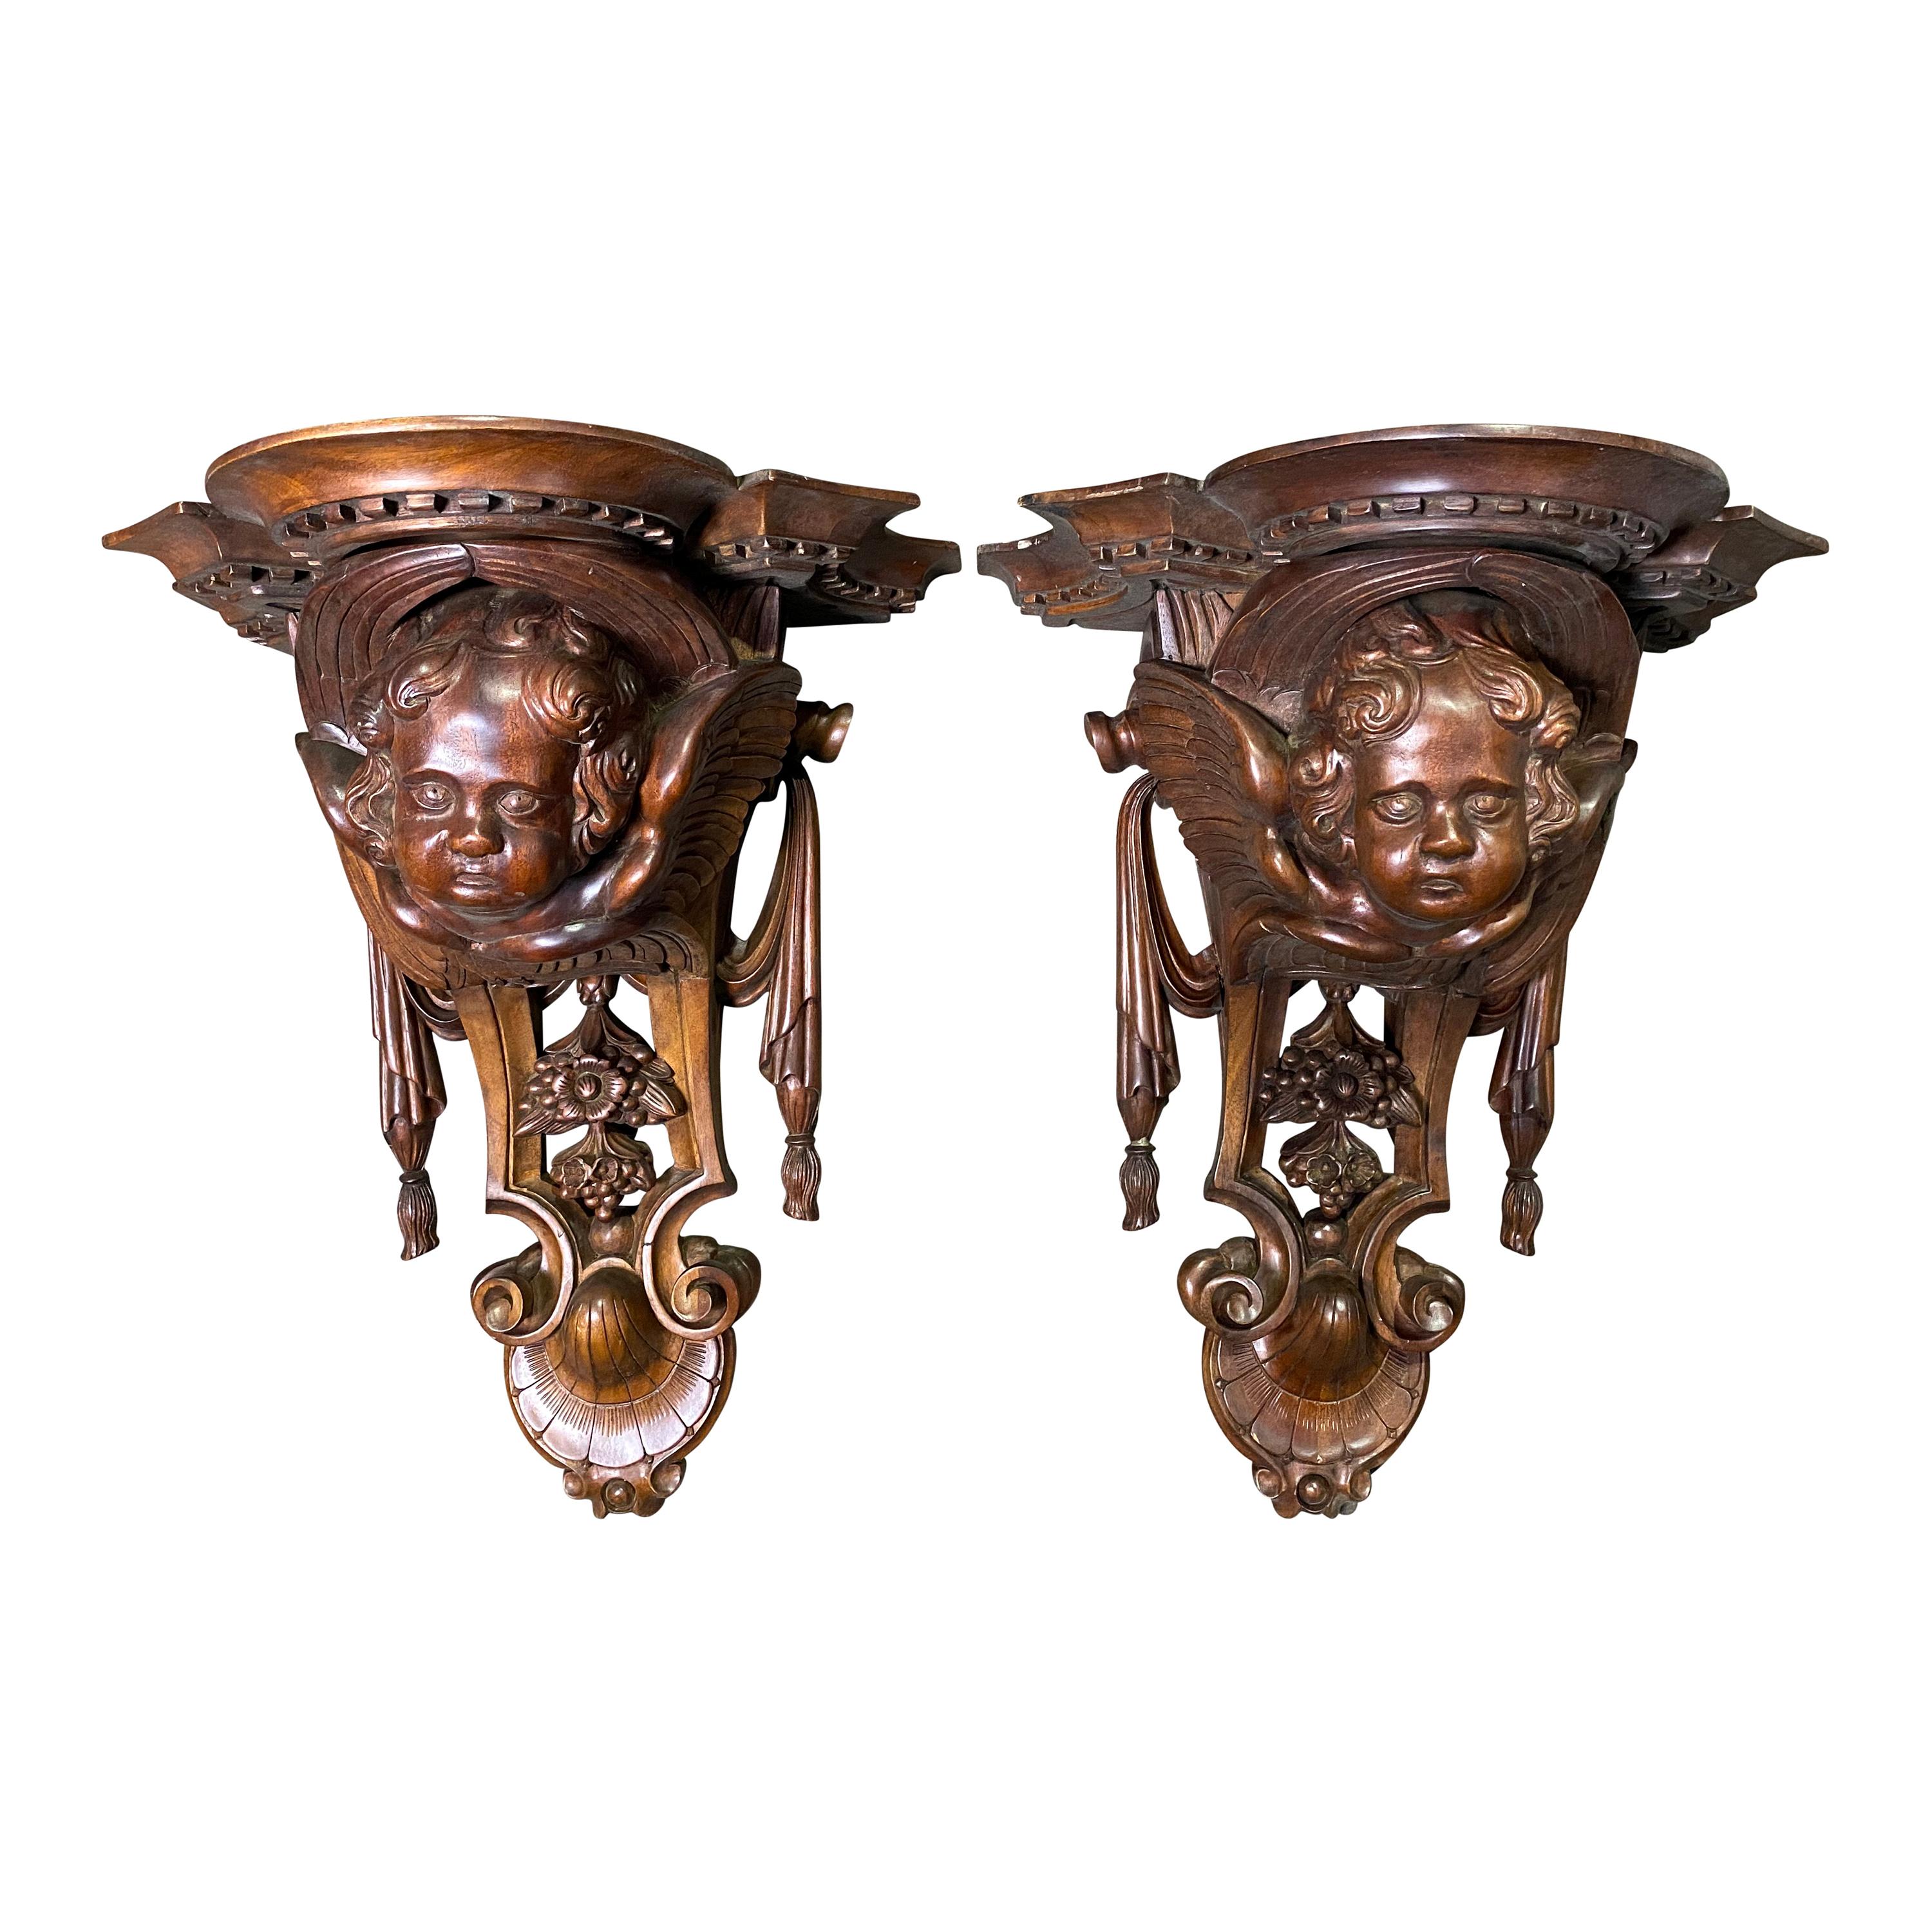 Wooden Carved Wall Sconces with Cherub Faces, 20th Century For Sale